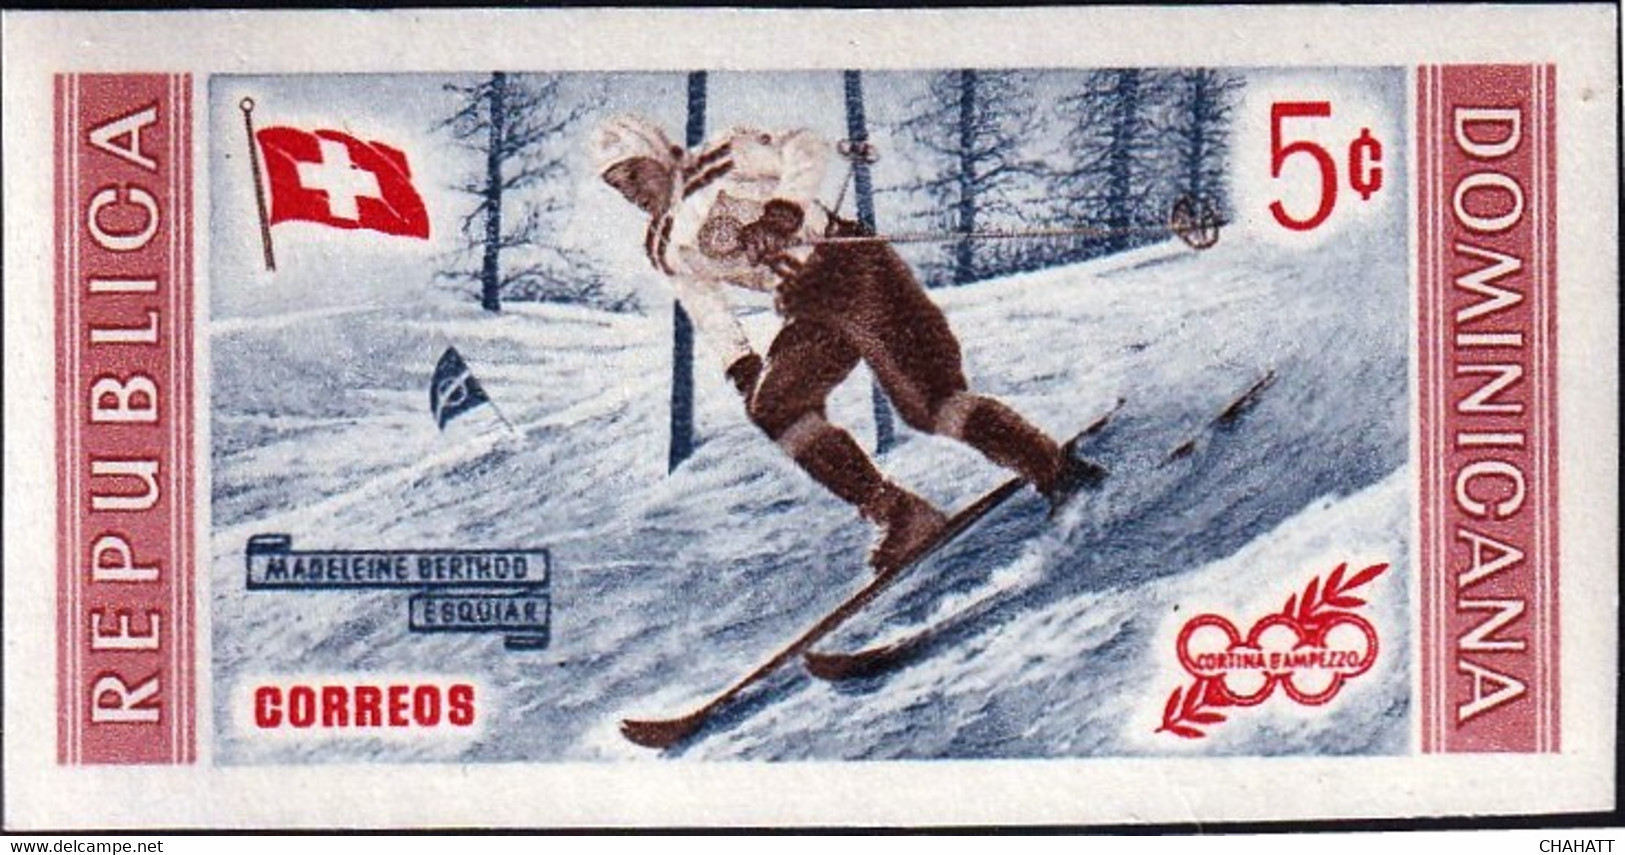 WINTER OLYMPICS-1956-SKIING-PERF & IMPERF-DOMINICANA-MNH-A4-535 - Winter 1956: Cortina D'Ampezzo